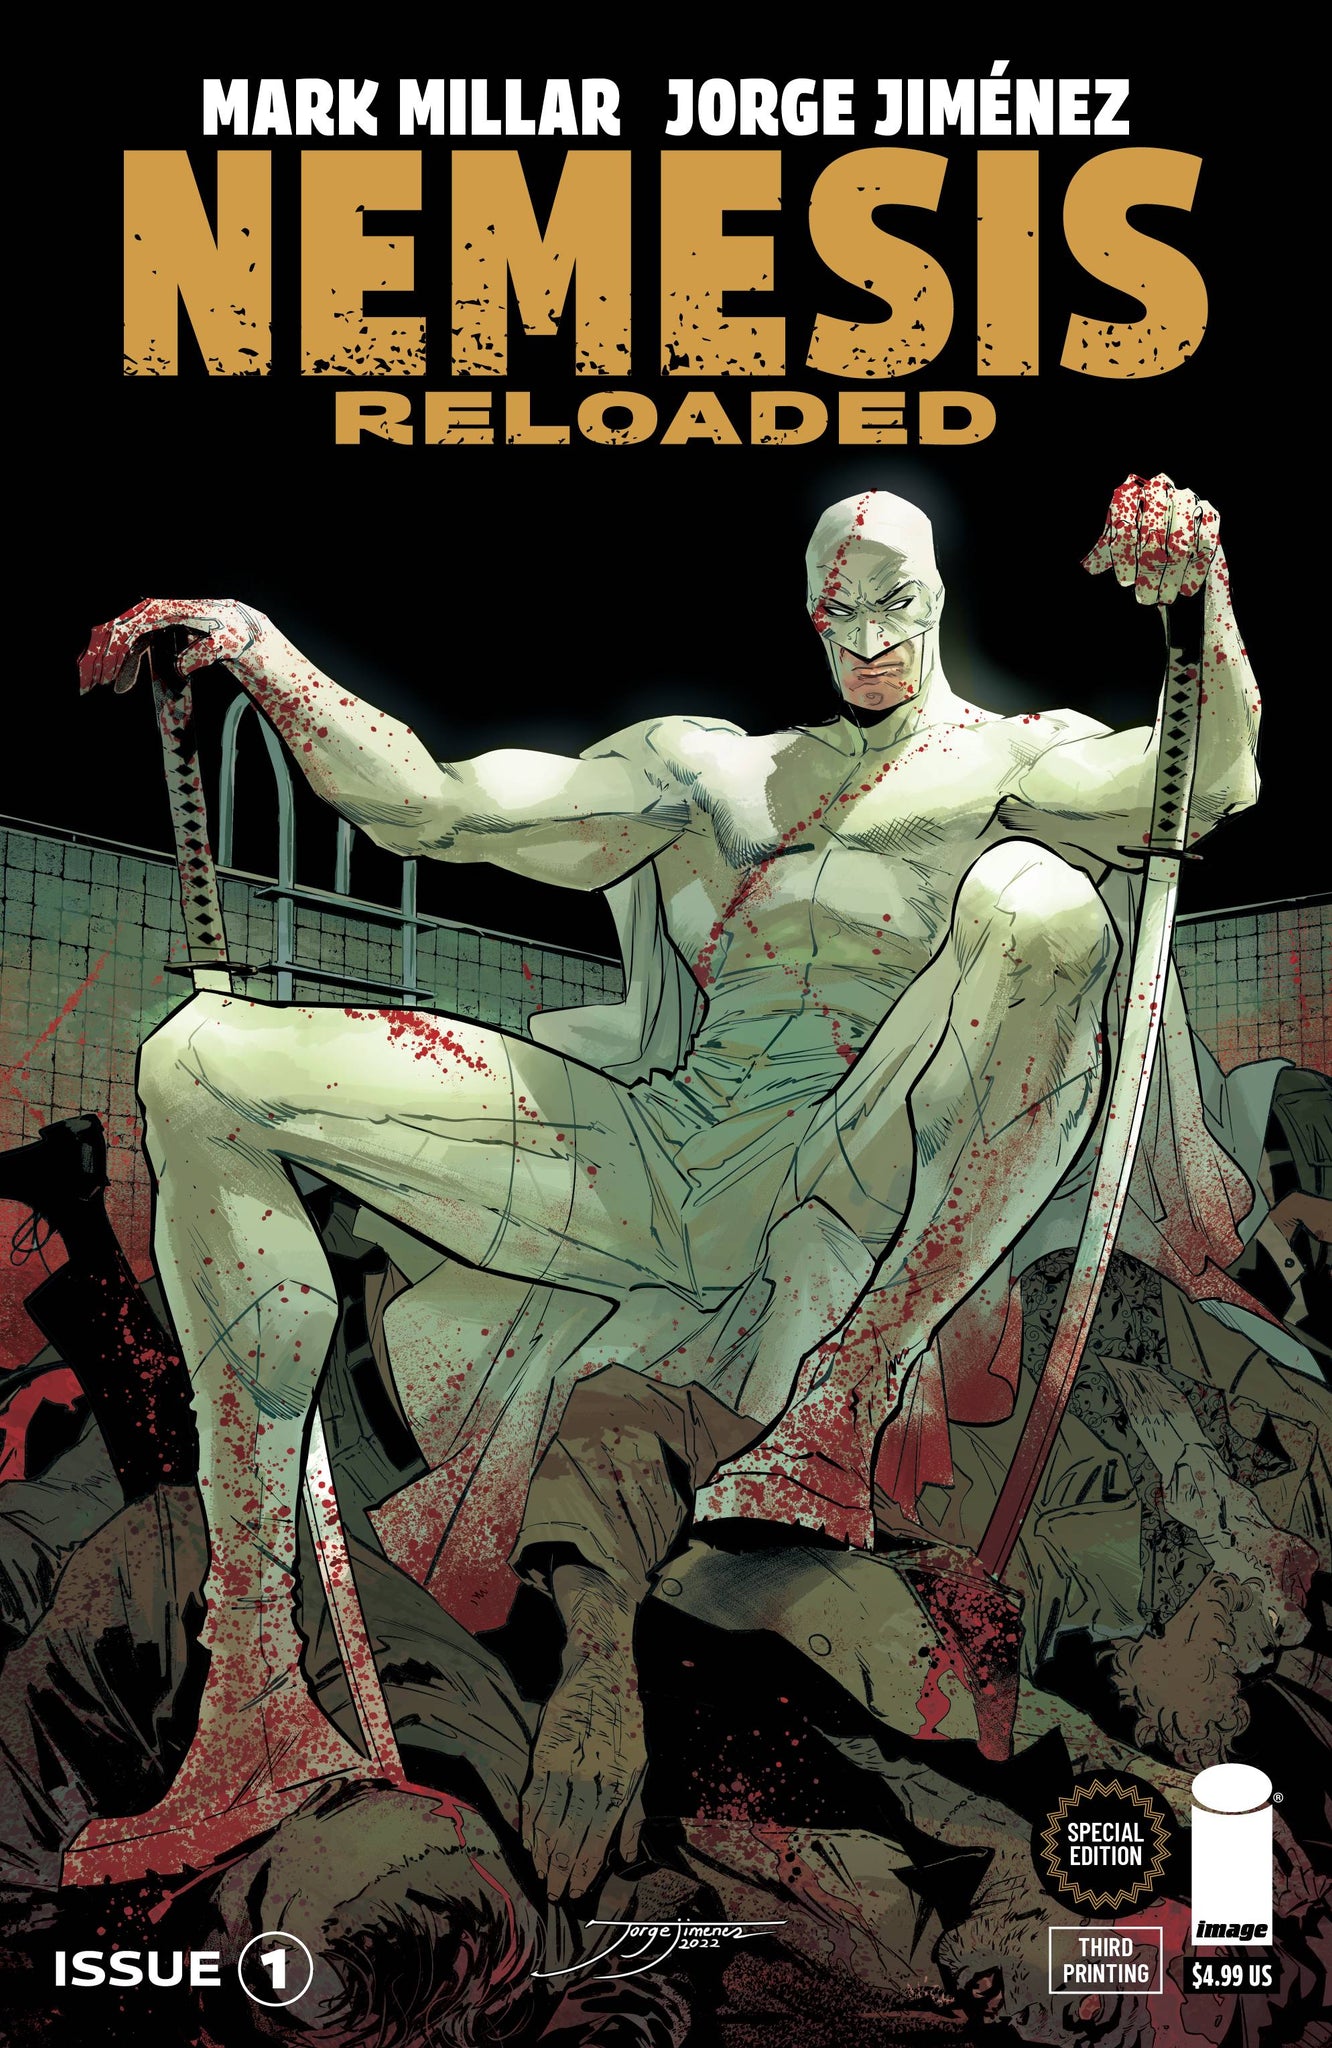 NEMESIS RELOADED #1 (OF 5) 3RD PTG SPECIAL EDITION (MR)